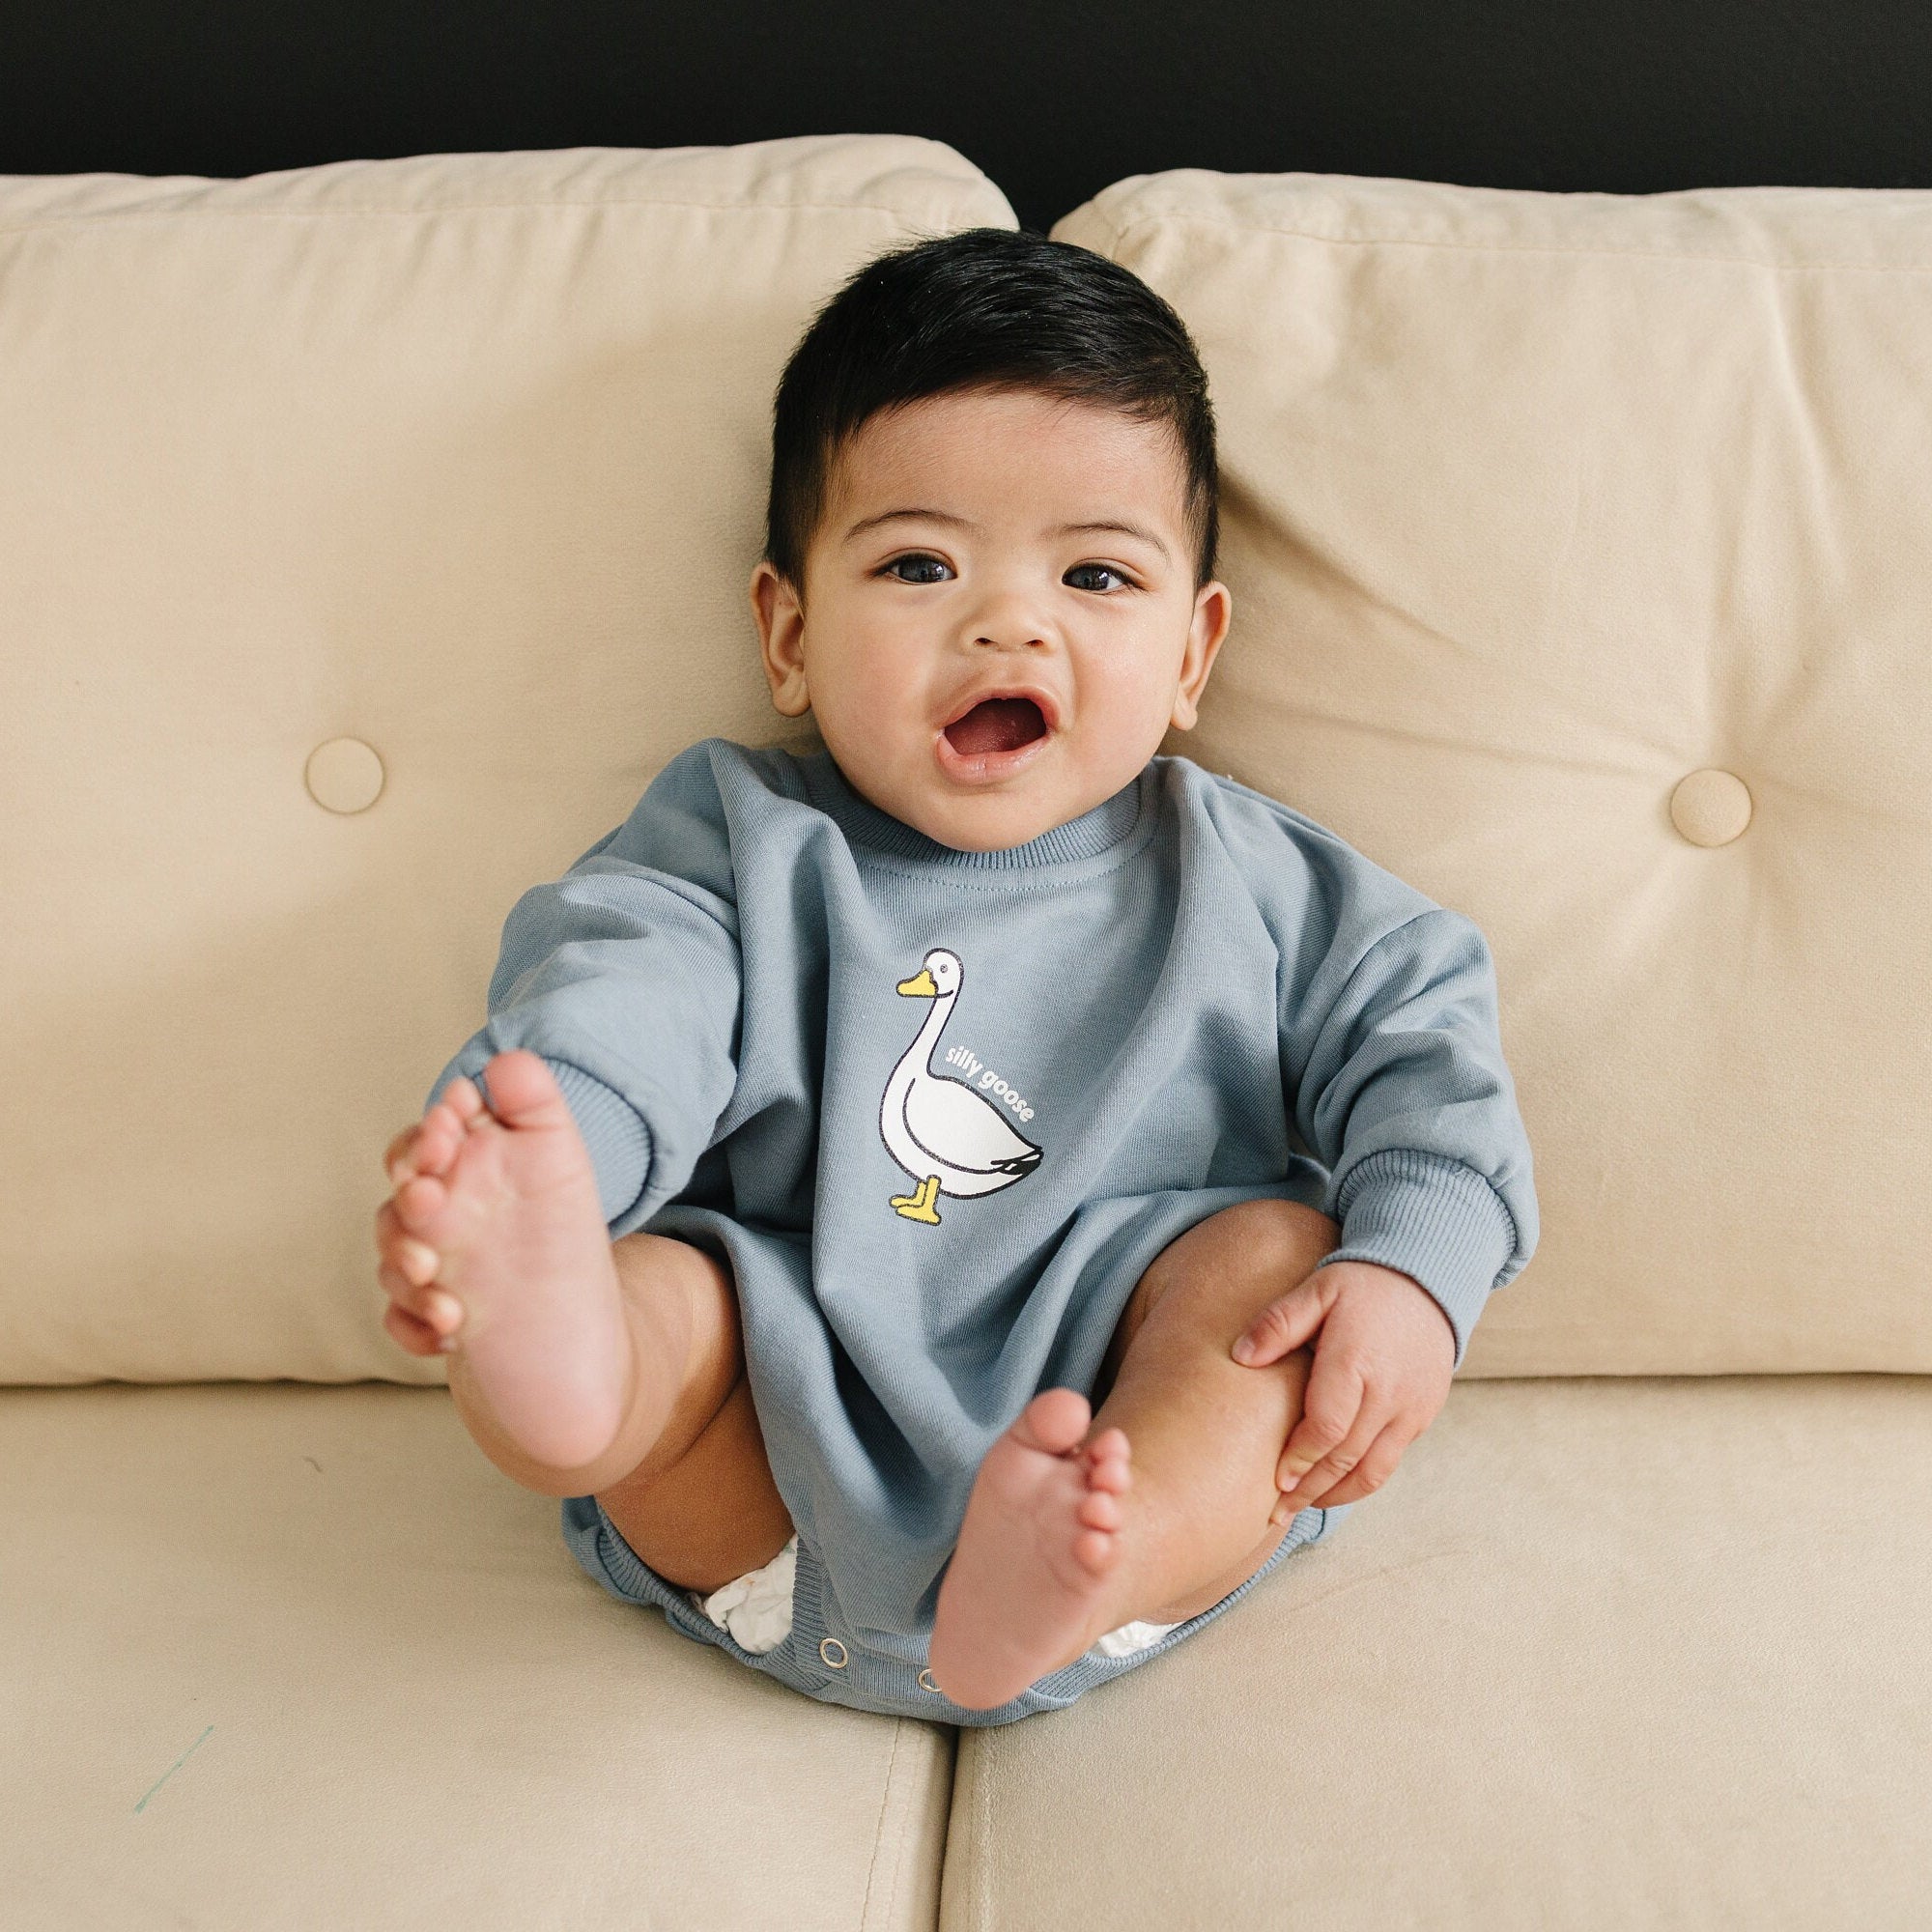 Silly Goose Oversized Sweatshirt Romper - Neutral Baby Bubble Romper - Baby Boy Outfit - Baby Girl Clothes - Blue Taupe - Geese Duck